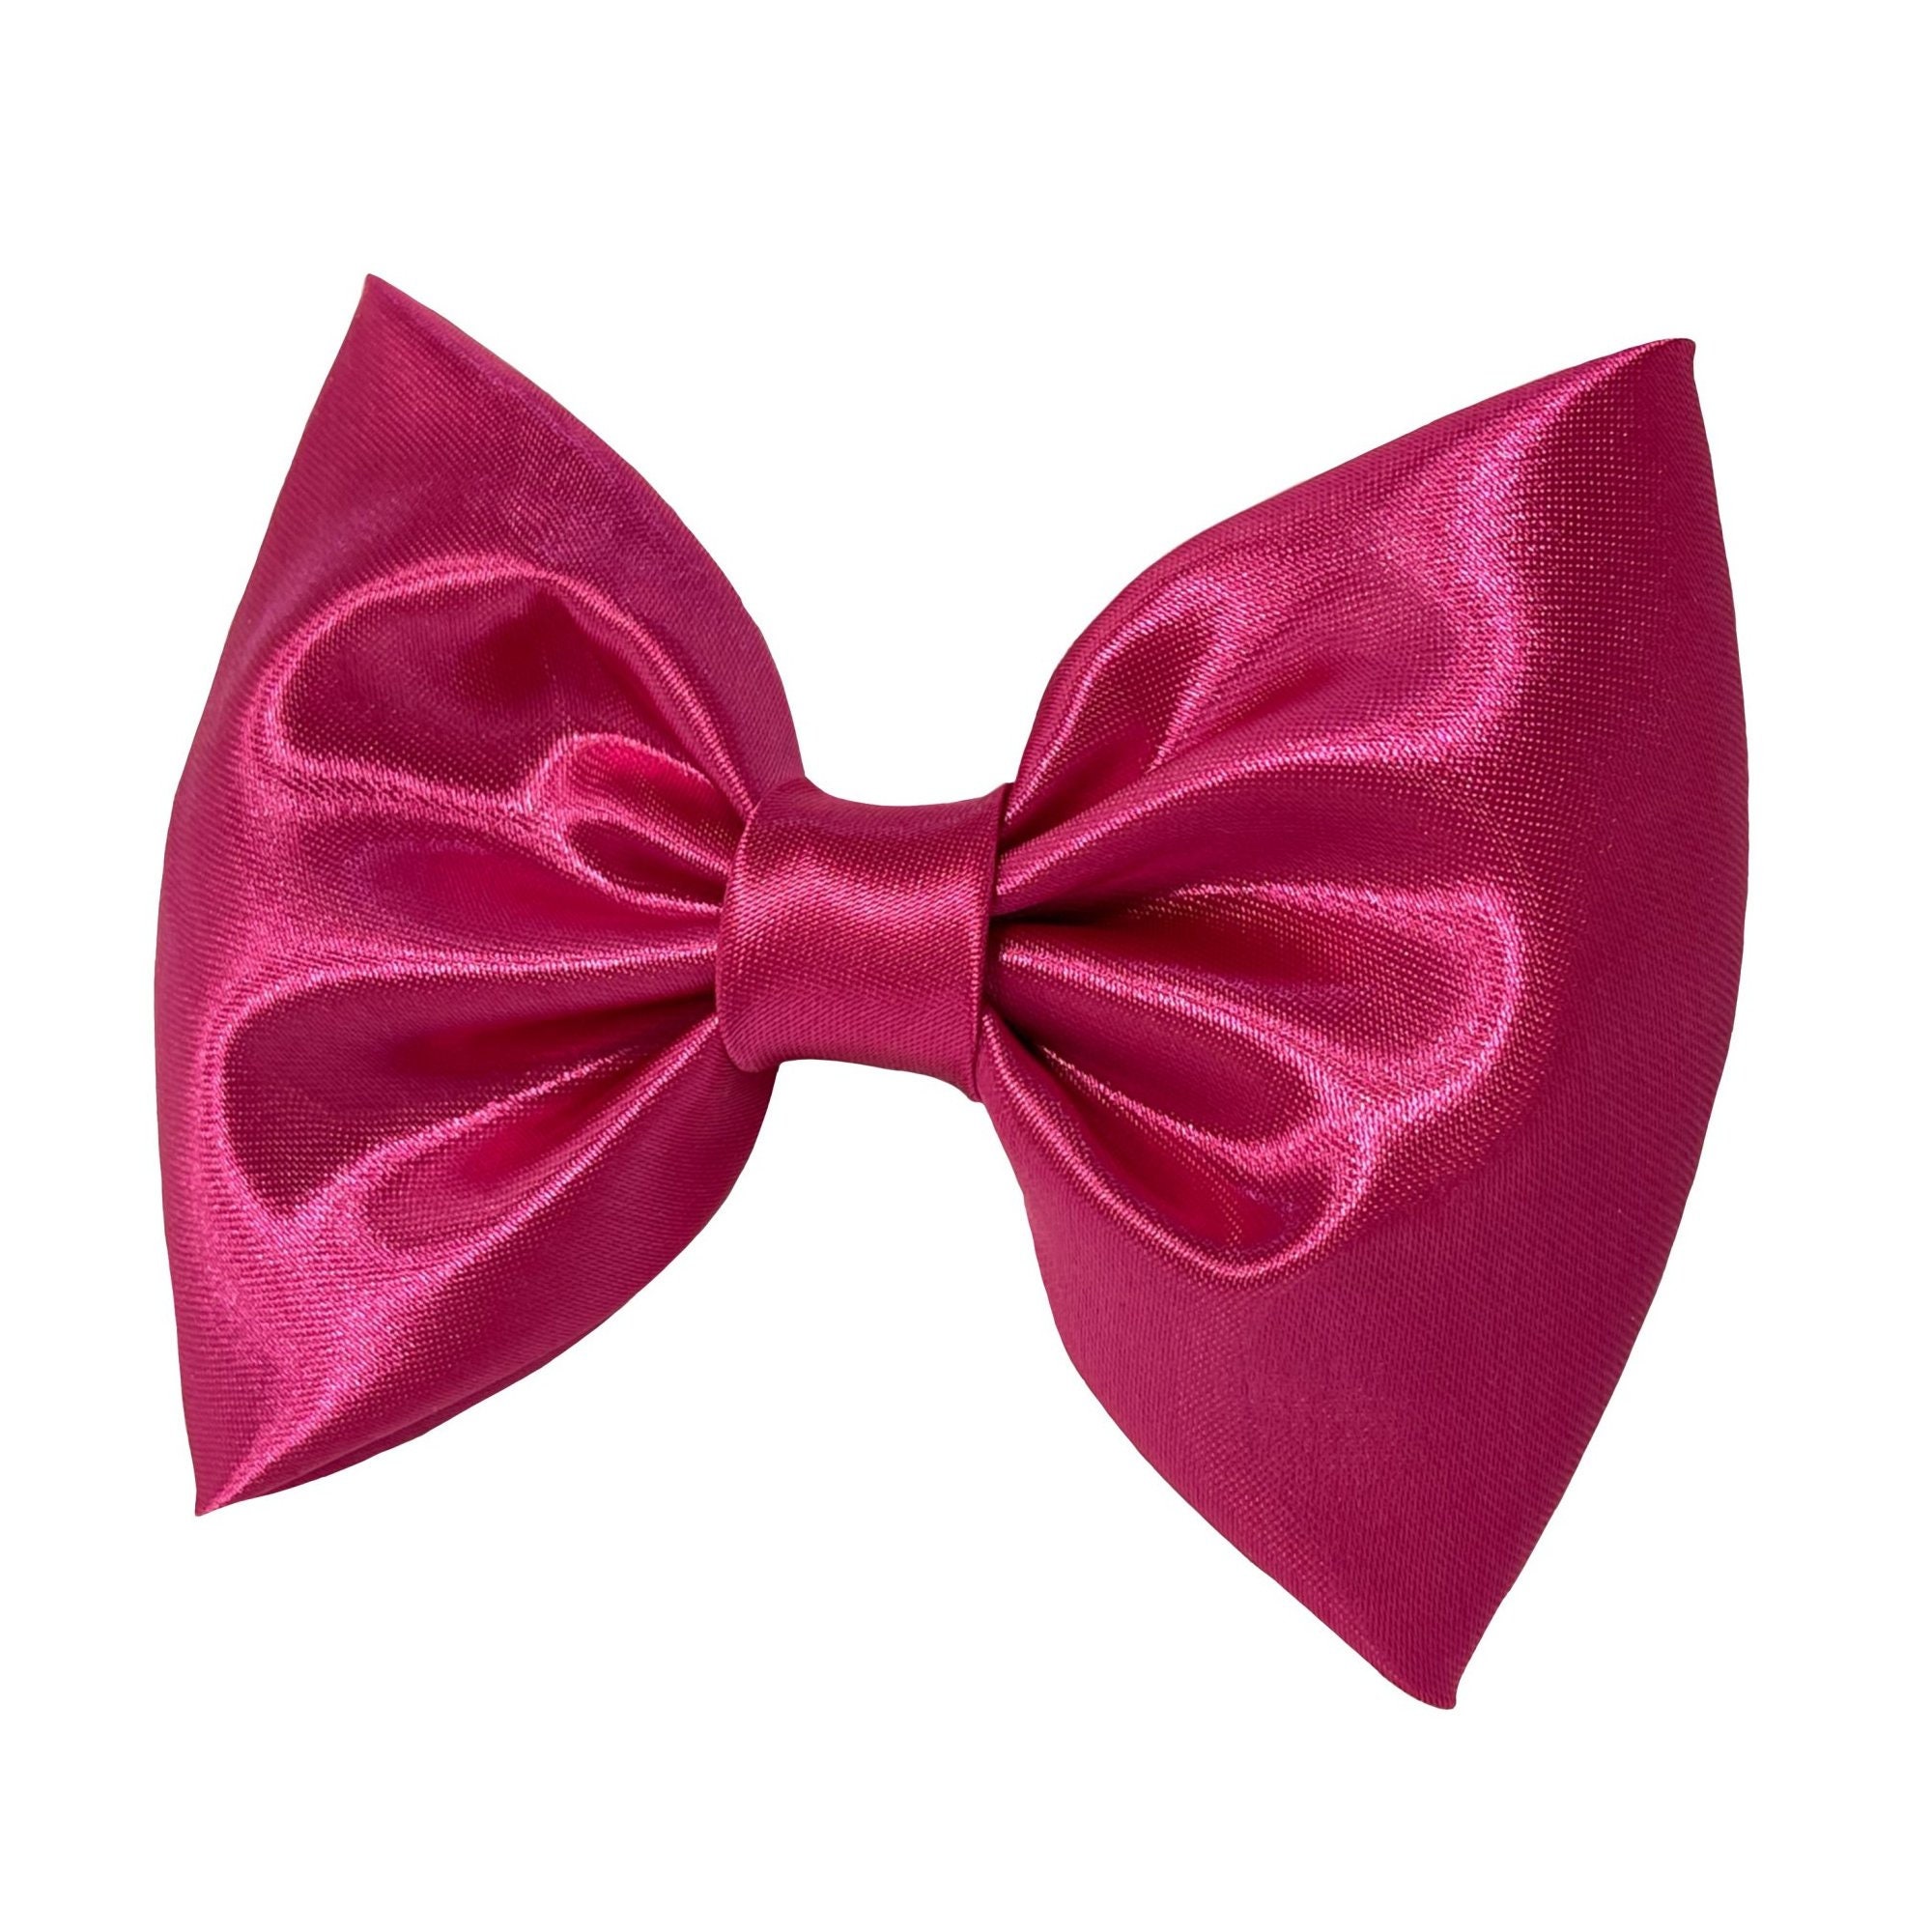 TitasHidingPlace Pink Hair Bow for Women, Large Pink Bow, Pink Bow for Girls, Big Bows, Pink Bow, Fabric Bows, Satin Pink Bows, Pink Barrette Bow, Hair Bows